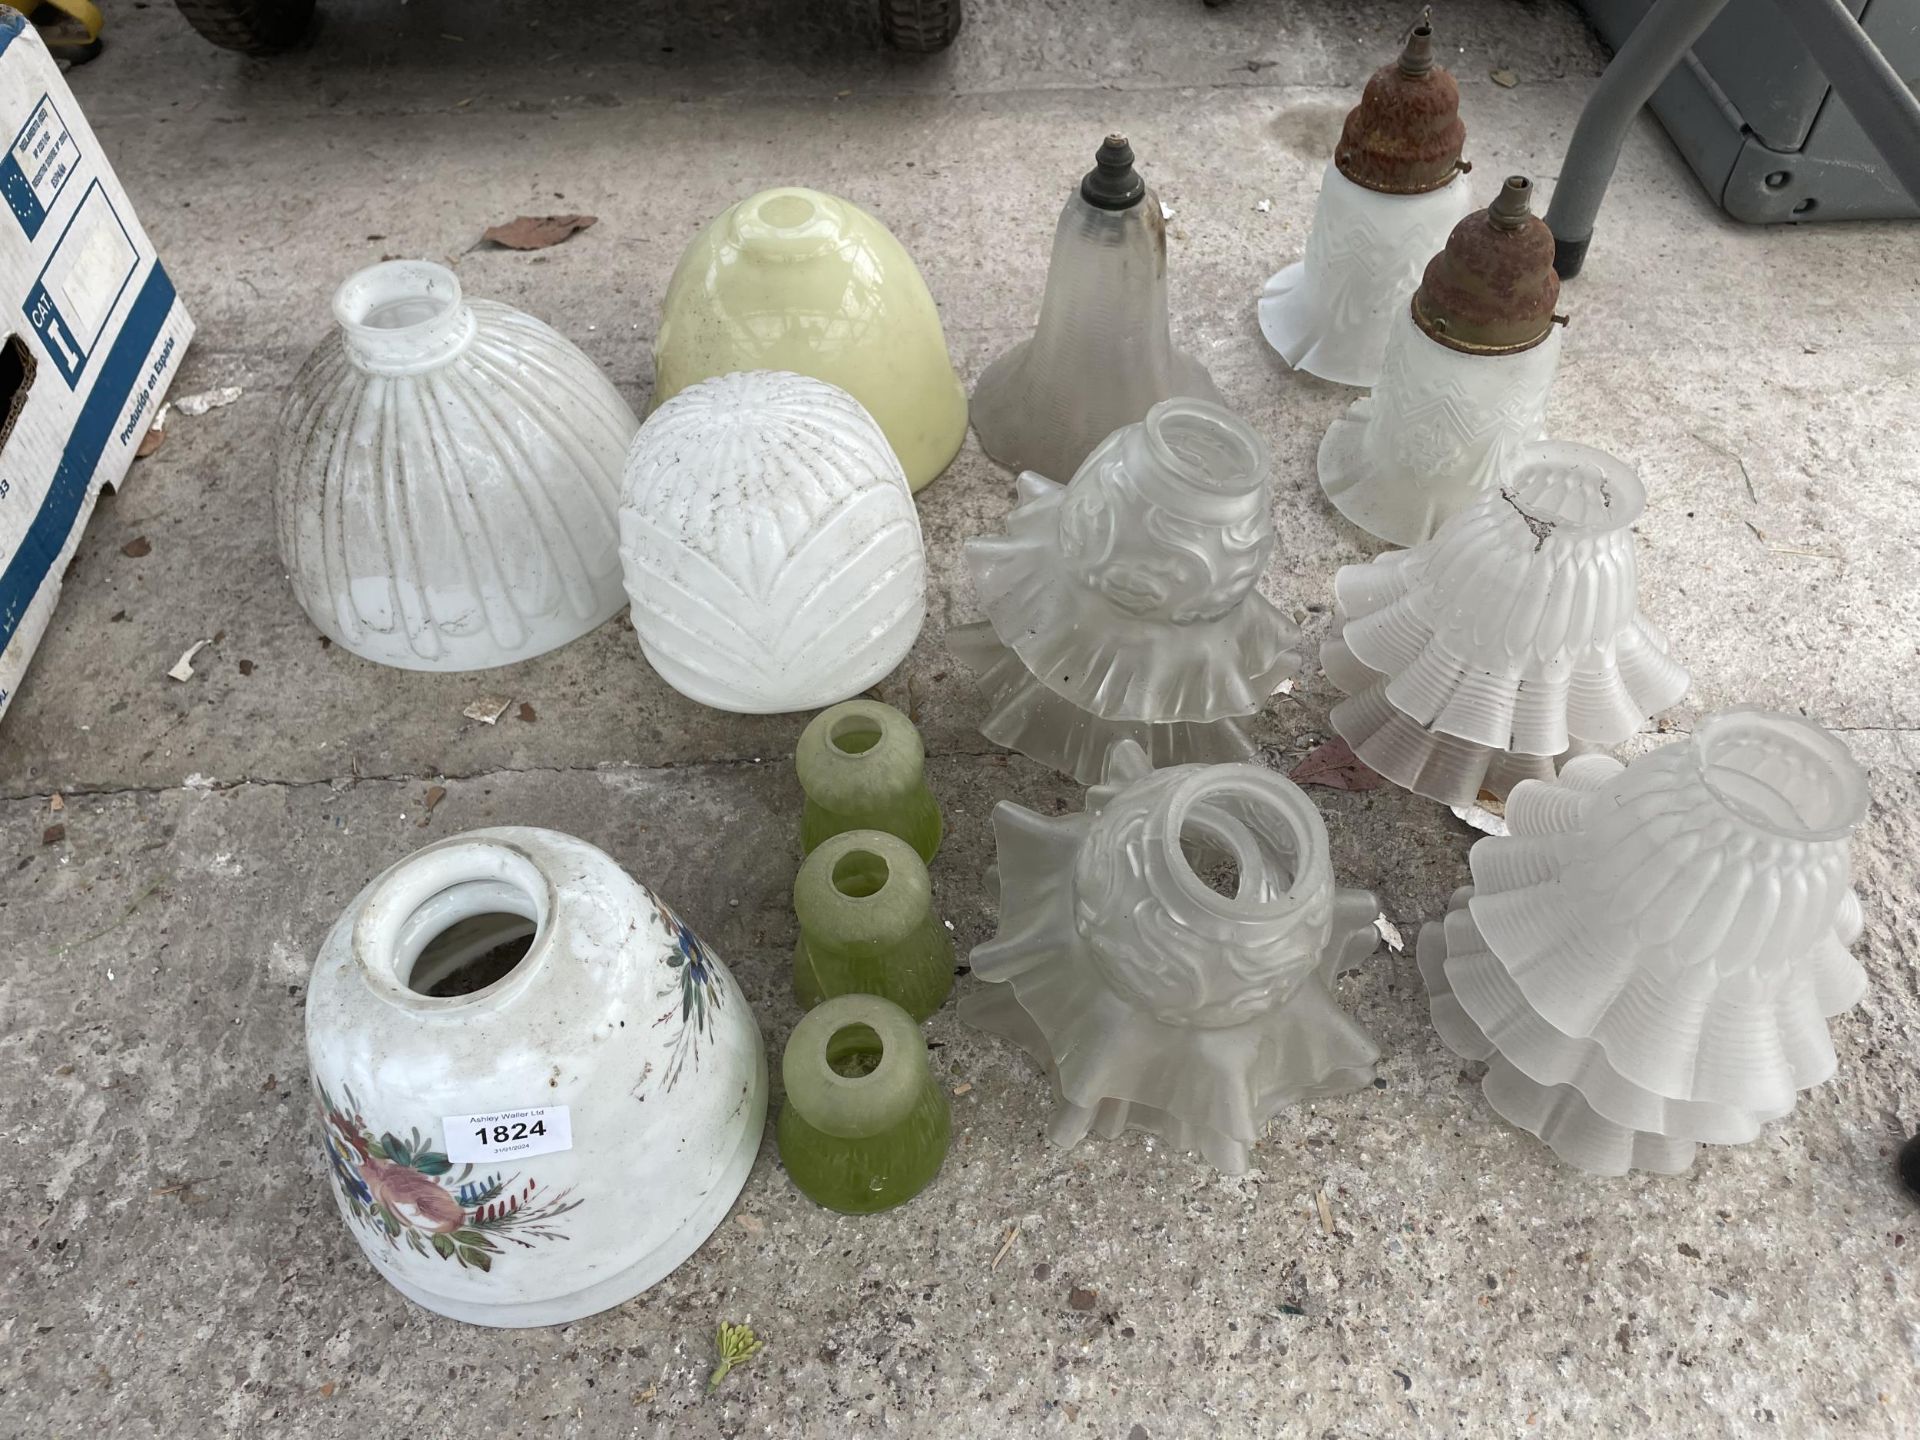 A LARGE ASSORTMENT OF VINTAGE AND RETRO GLASS LAMP SHADES